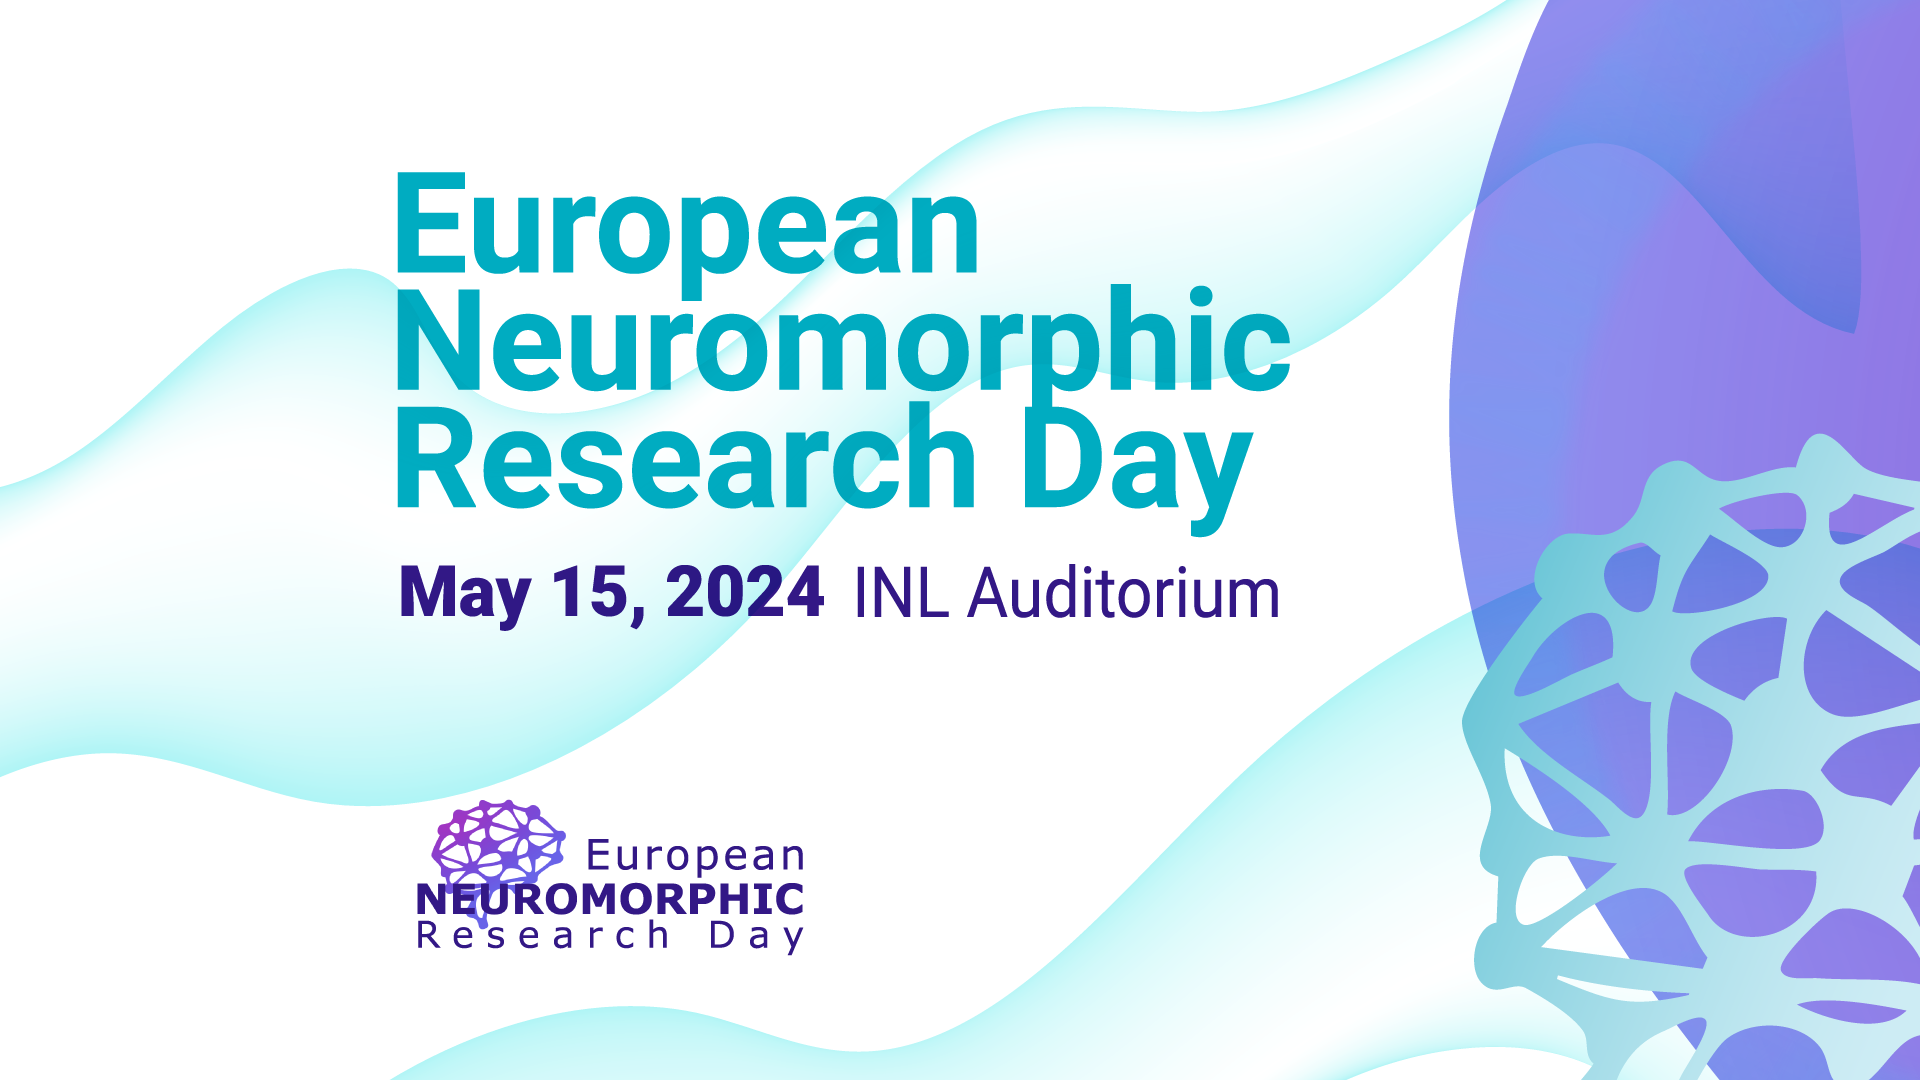 MAY 15: European Neuromorphic Computing Event Aims to Bridge Gap Between Research and Innovation